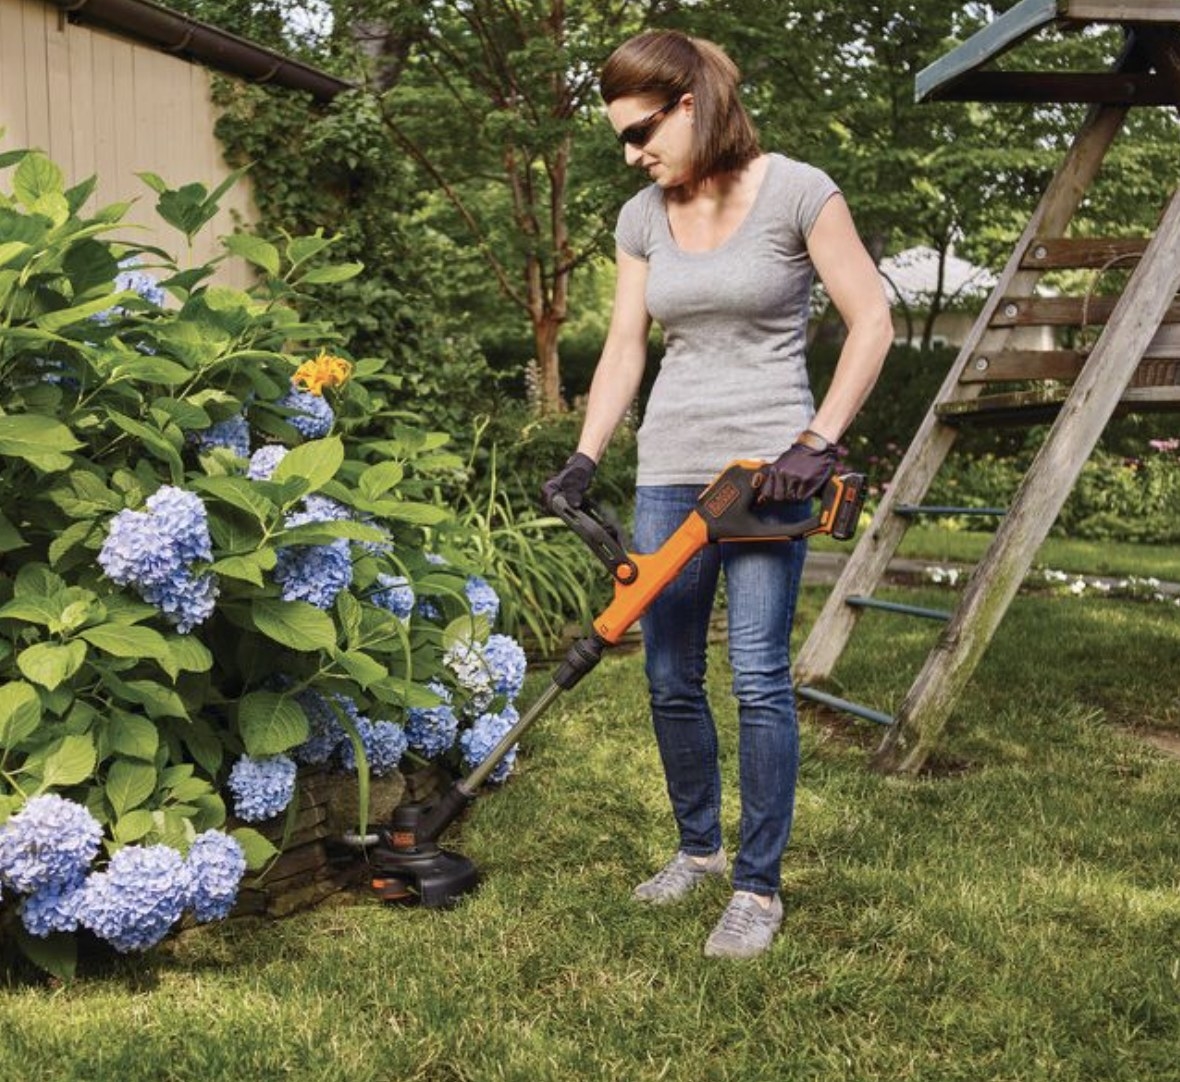 model using the weed whacker in a garden